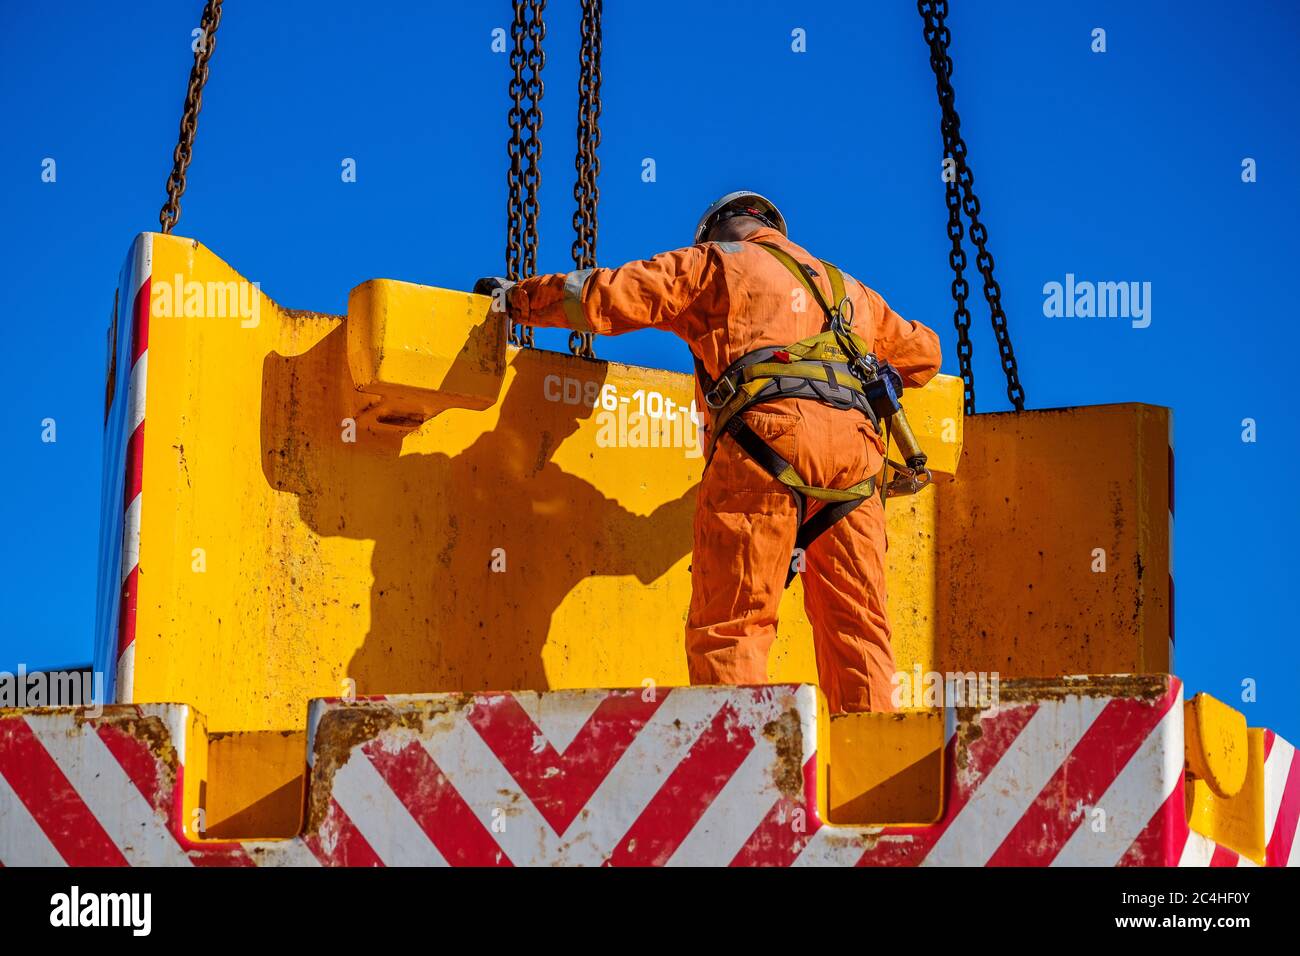 Engineer wearing orange overalls and hard hat guides mobile crane counterweight into position Stock Photo